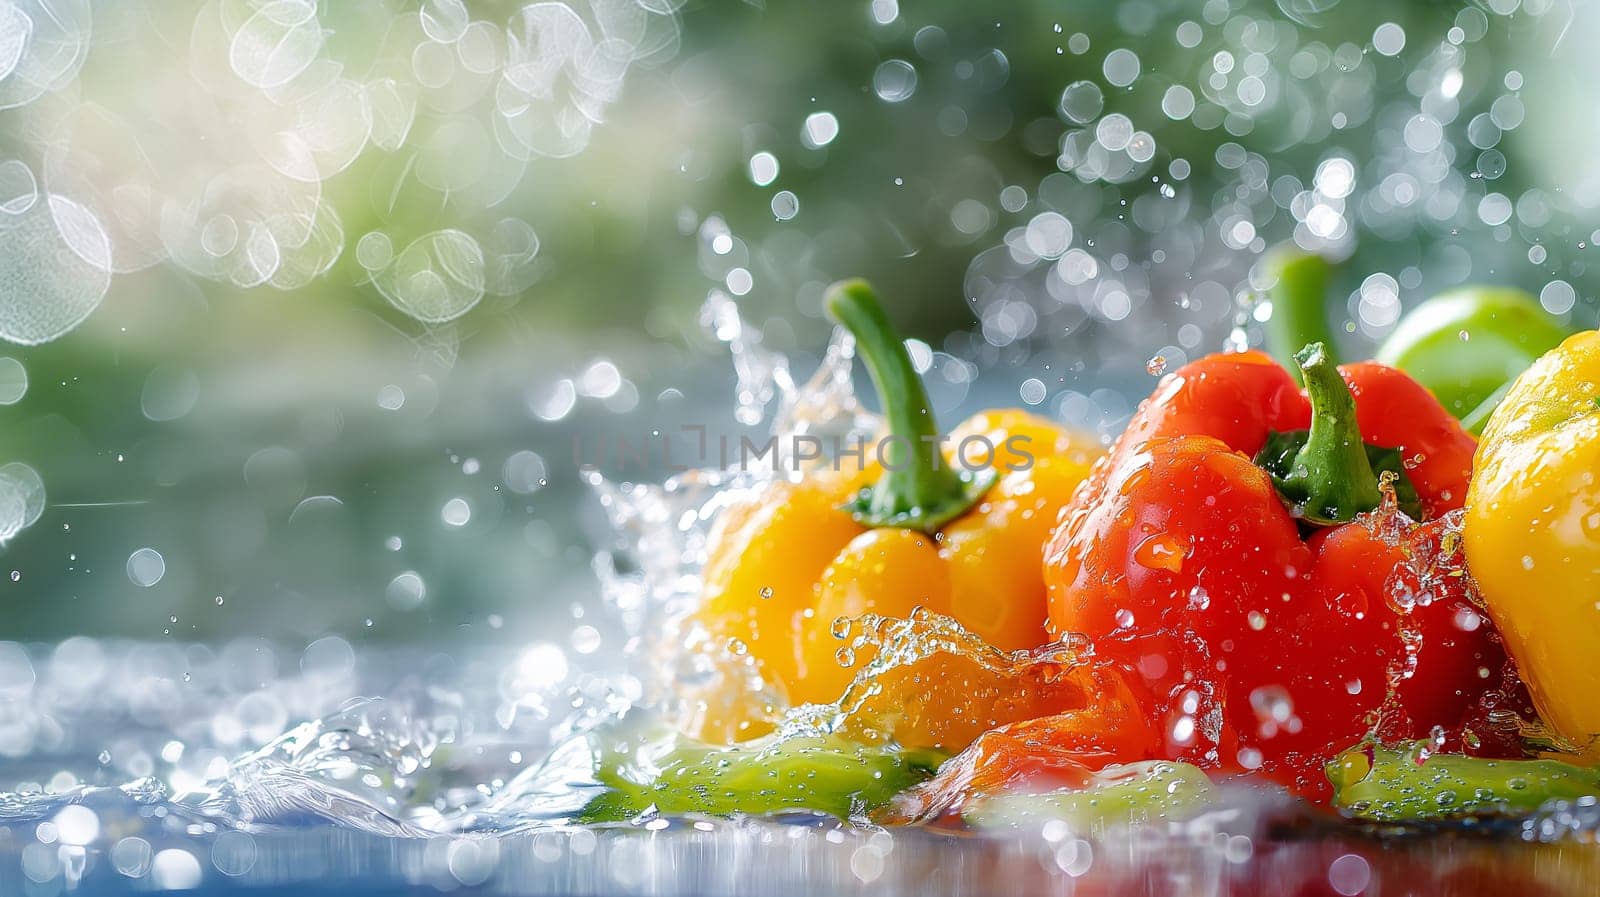 Fresh Bell Peppers Being Washed in Bright Daylight by chrisroll